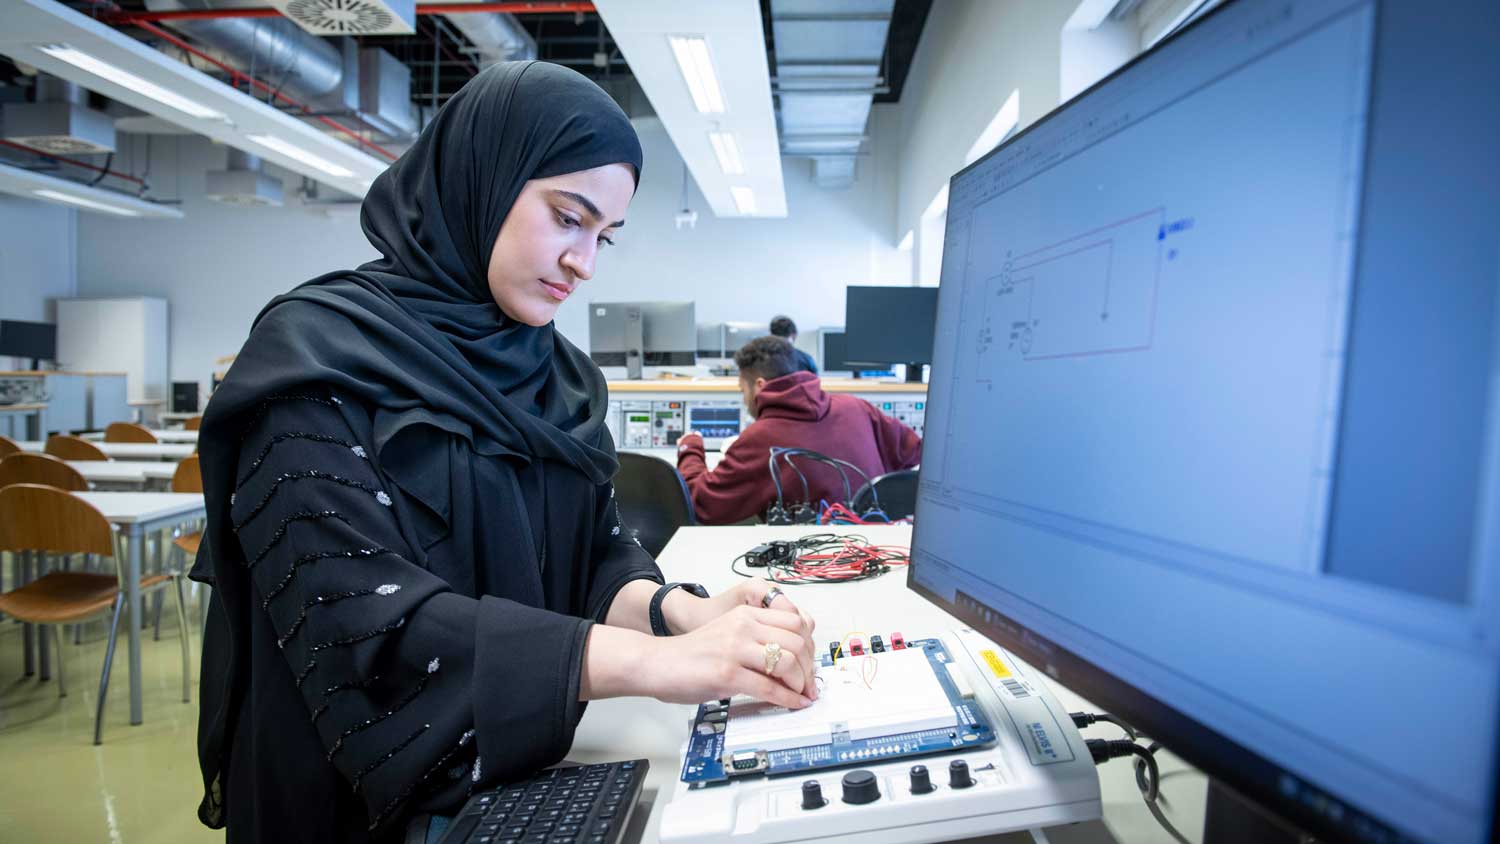 A student builds an electric circuit at the ϲʹ̳ Qatar campus